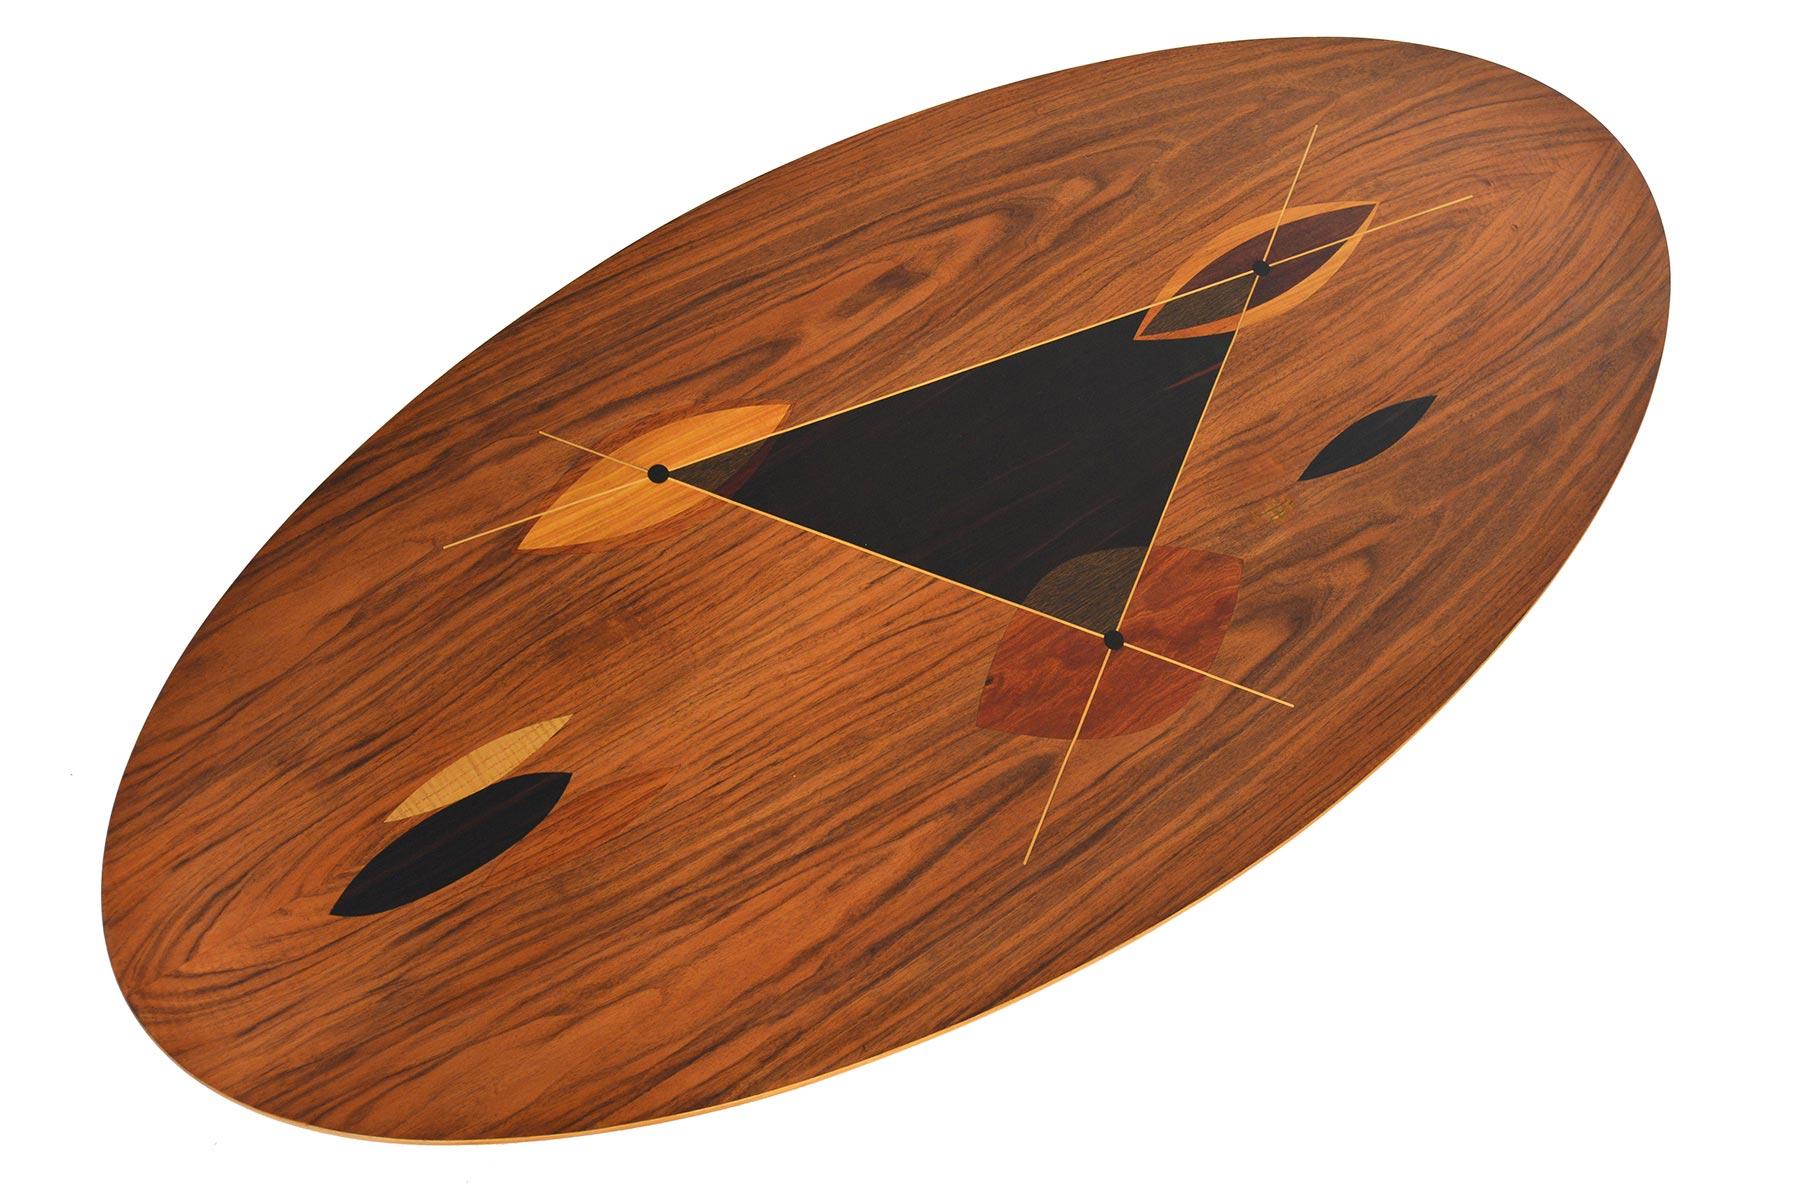 This Swedish modern atomic midcentury coffee table is as stunning close- up as it is from a distance. The beautiful walnut slab features marquetry inlays in oak, mahogany, and rosewood. Table stands on ebonized legs with brass caps. In original